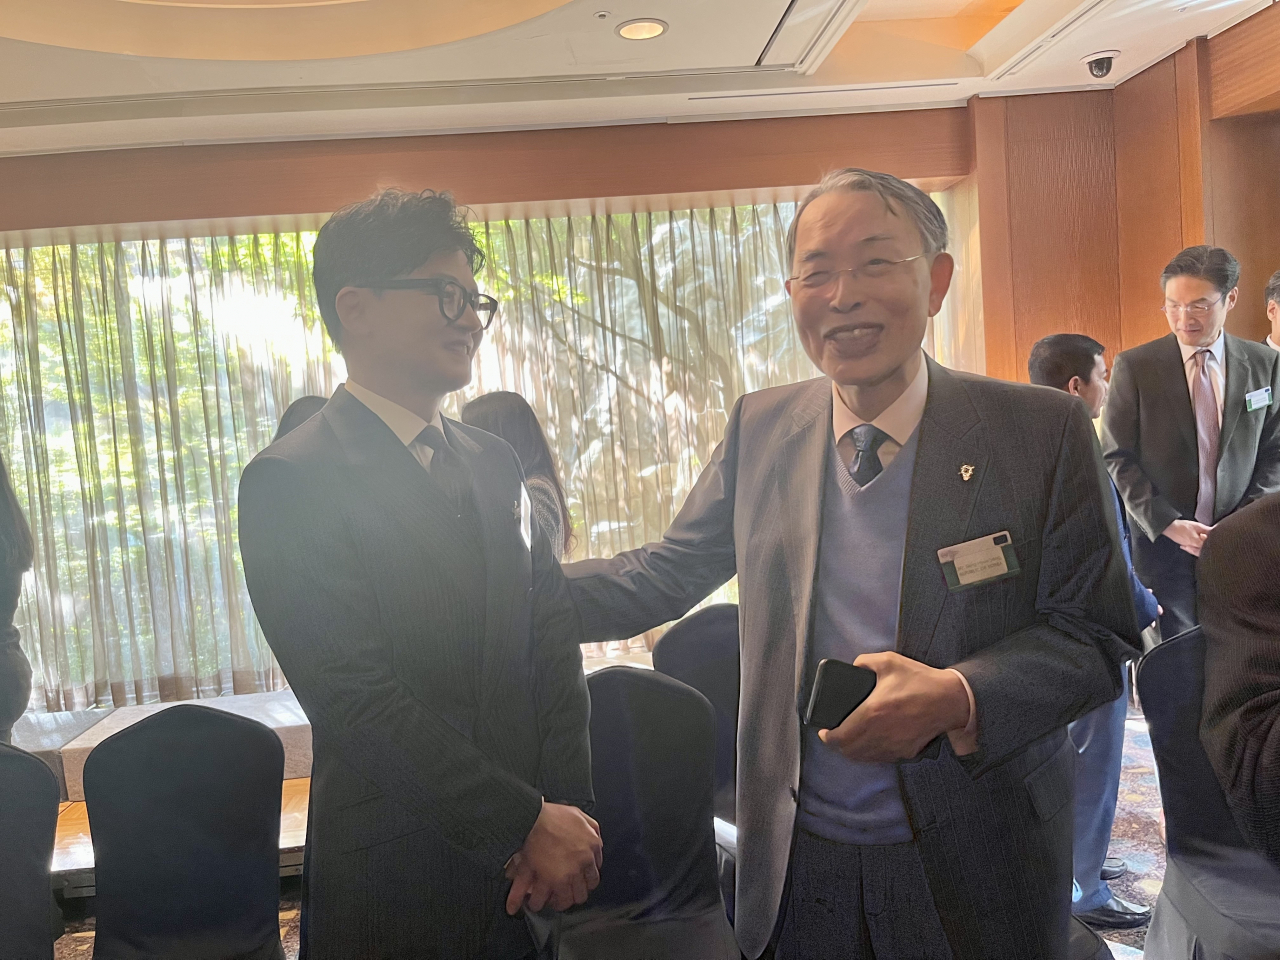 Minister of Justice Han Dong-hoon and former ICC chief Song Sang-hyun greet one another at the seminar at a hotel in central Seoul on Tuesday. (Kim Arin/The Korea Herald)